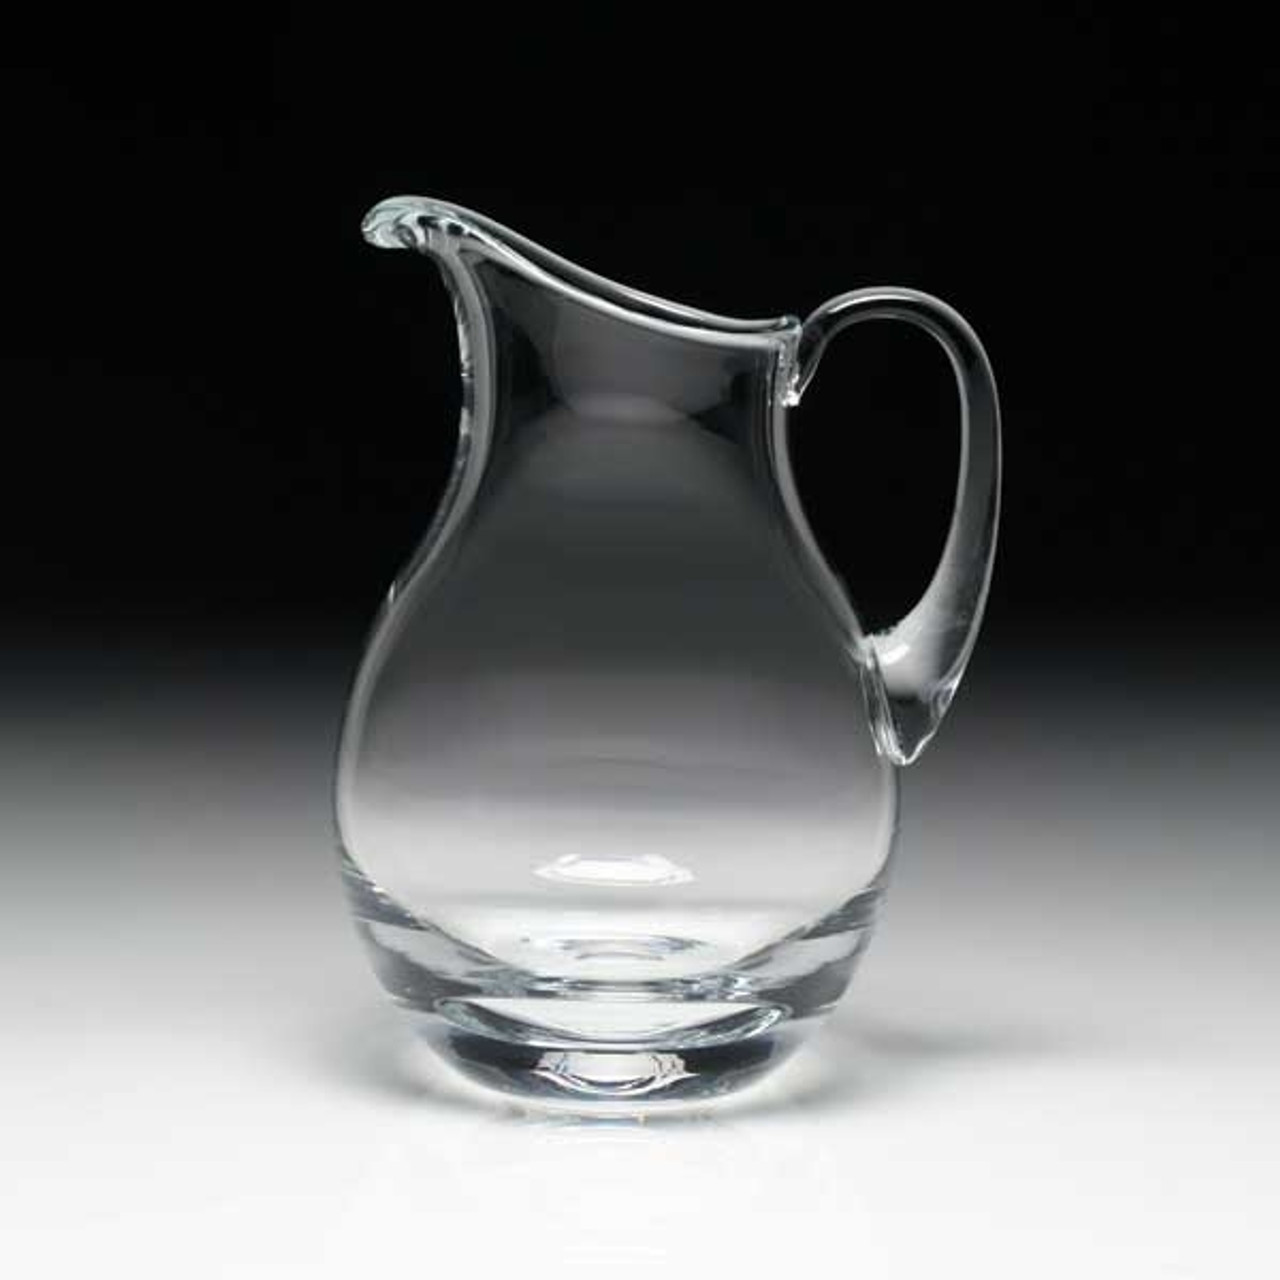 William Yeoward Country Pitchers & Jugs Water Pitcher - 2 Pint